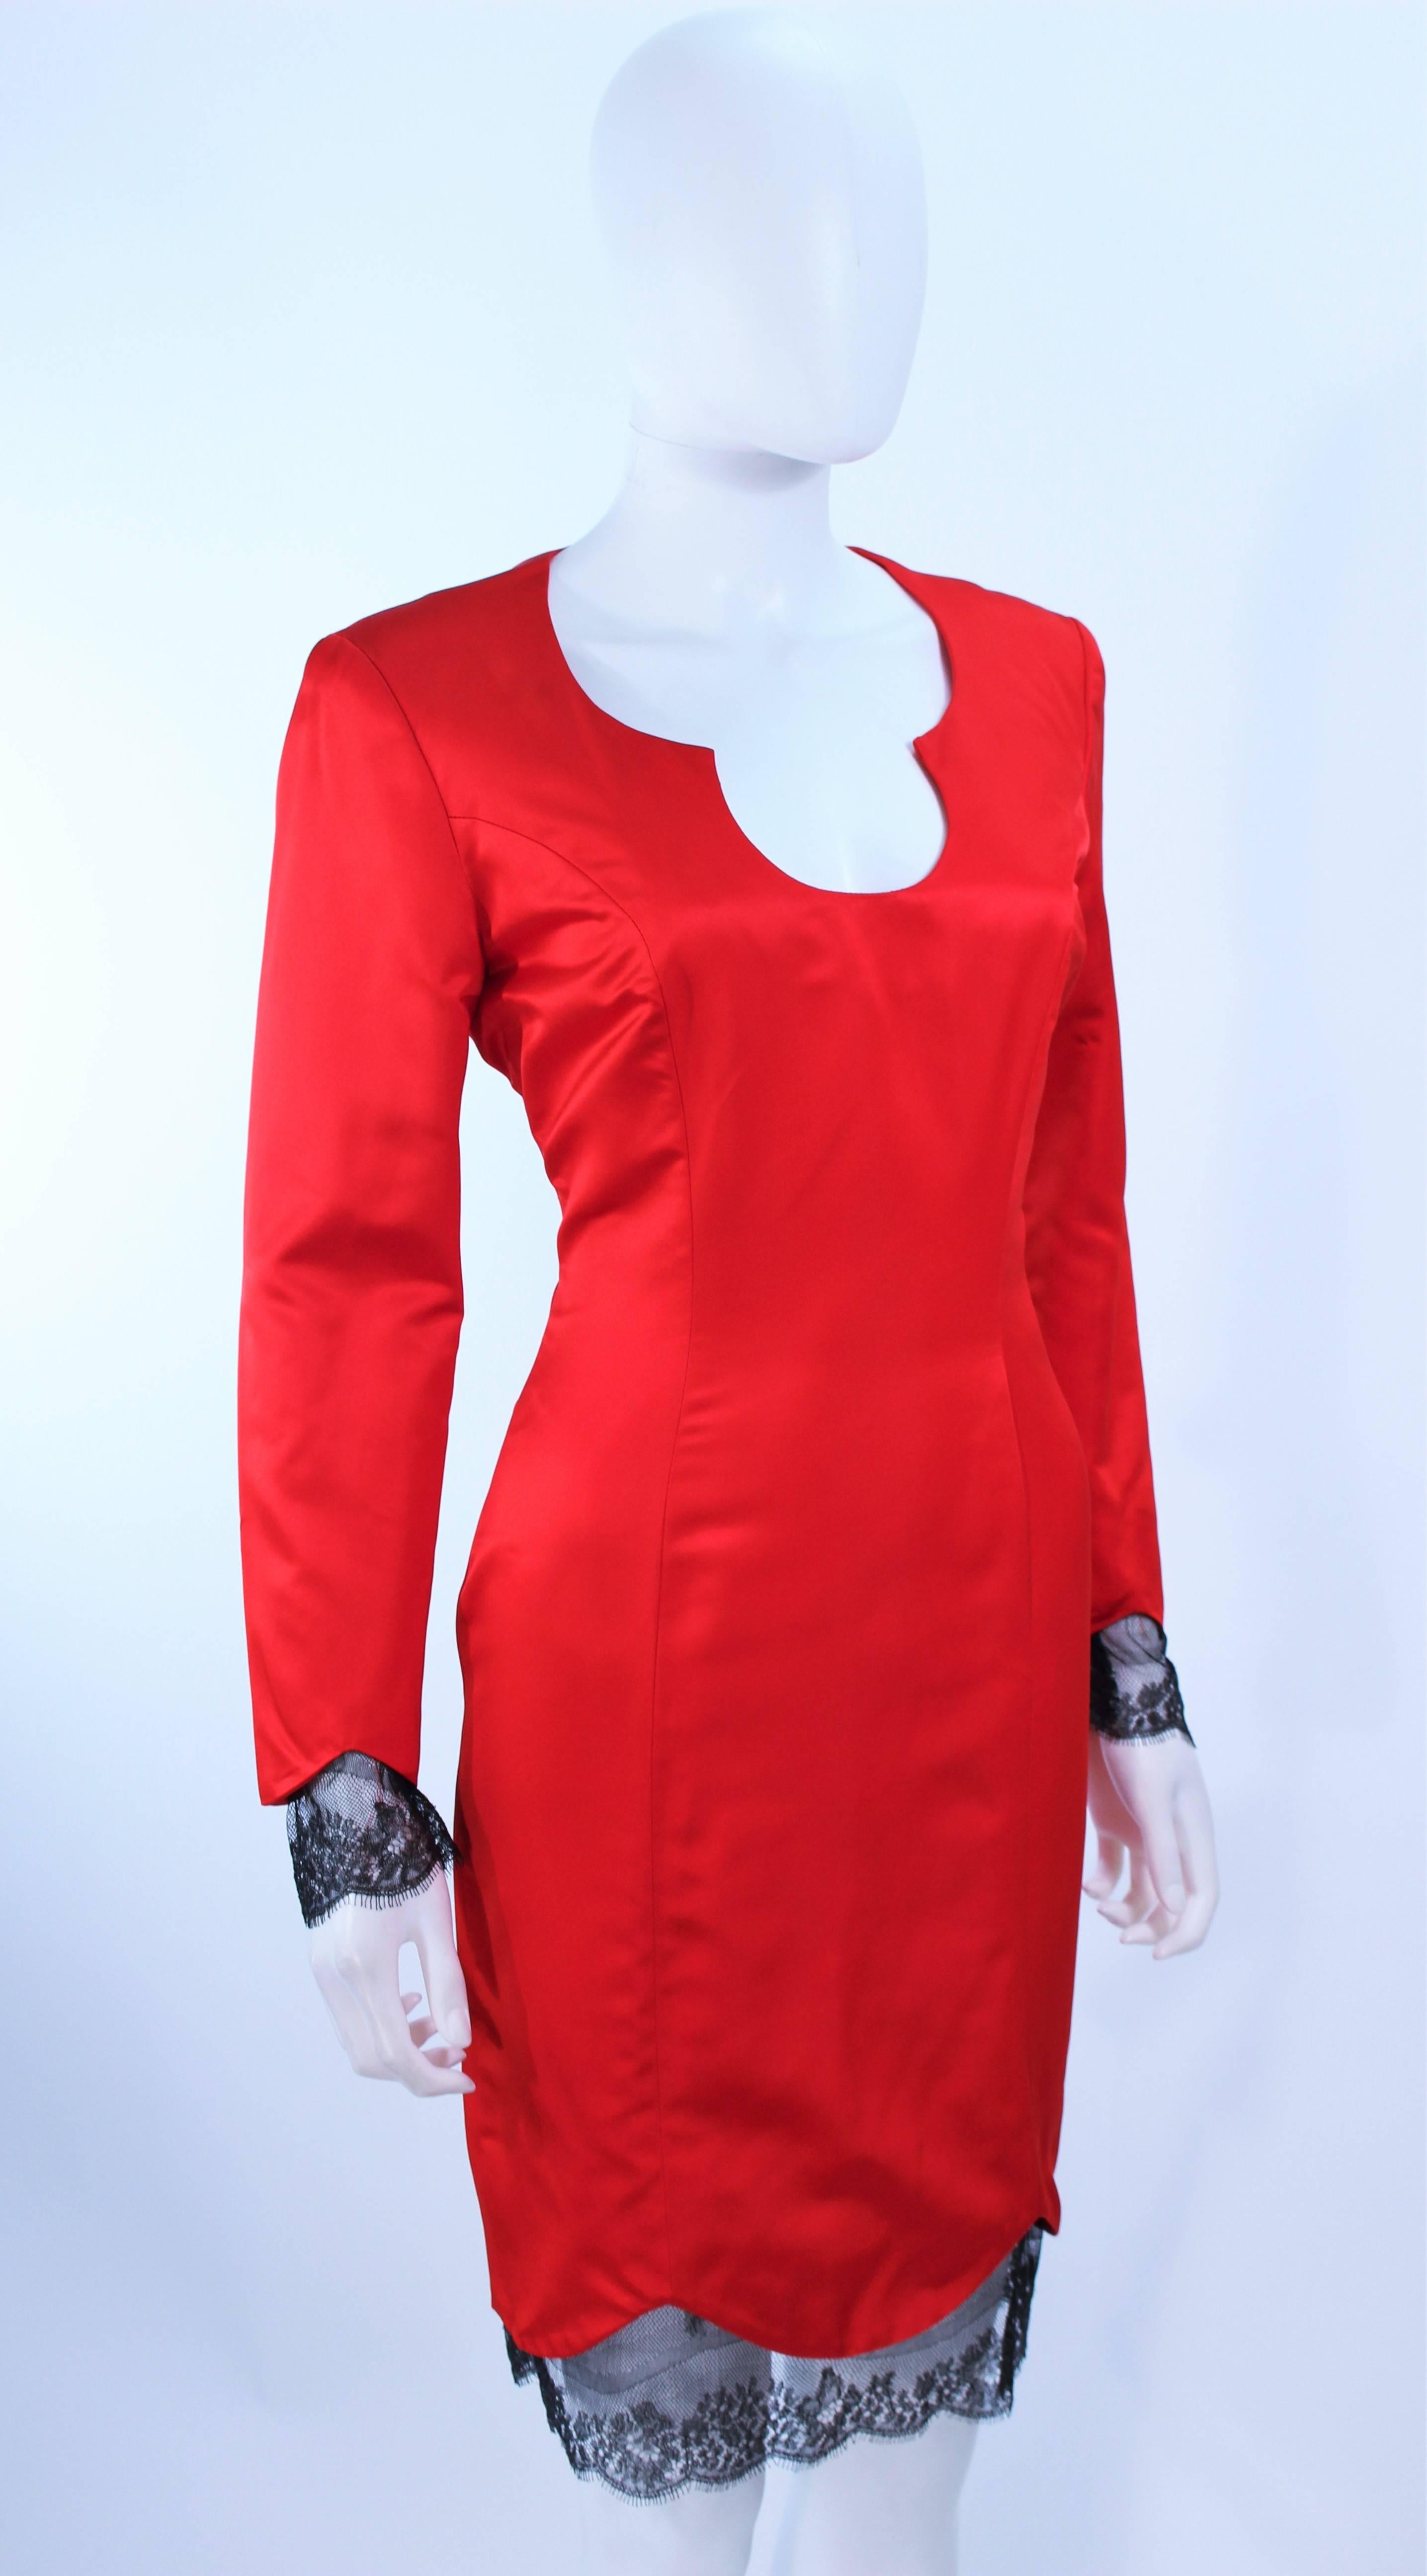 TED HEYMAN Red Silk Cocktail Dress with Lace Trim Size 8 For Sale 2